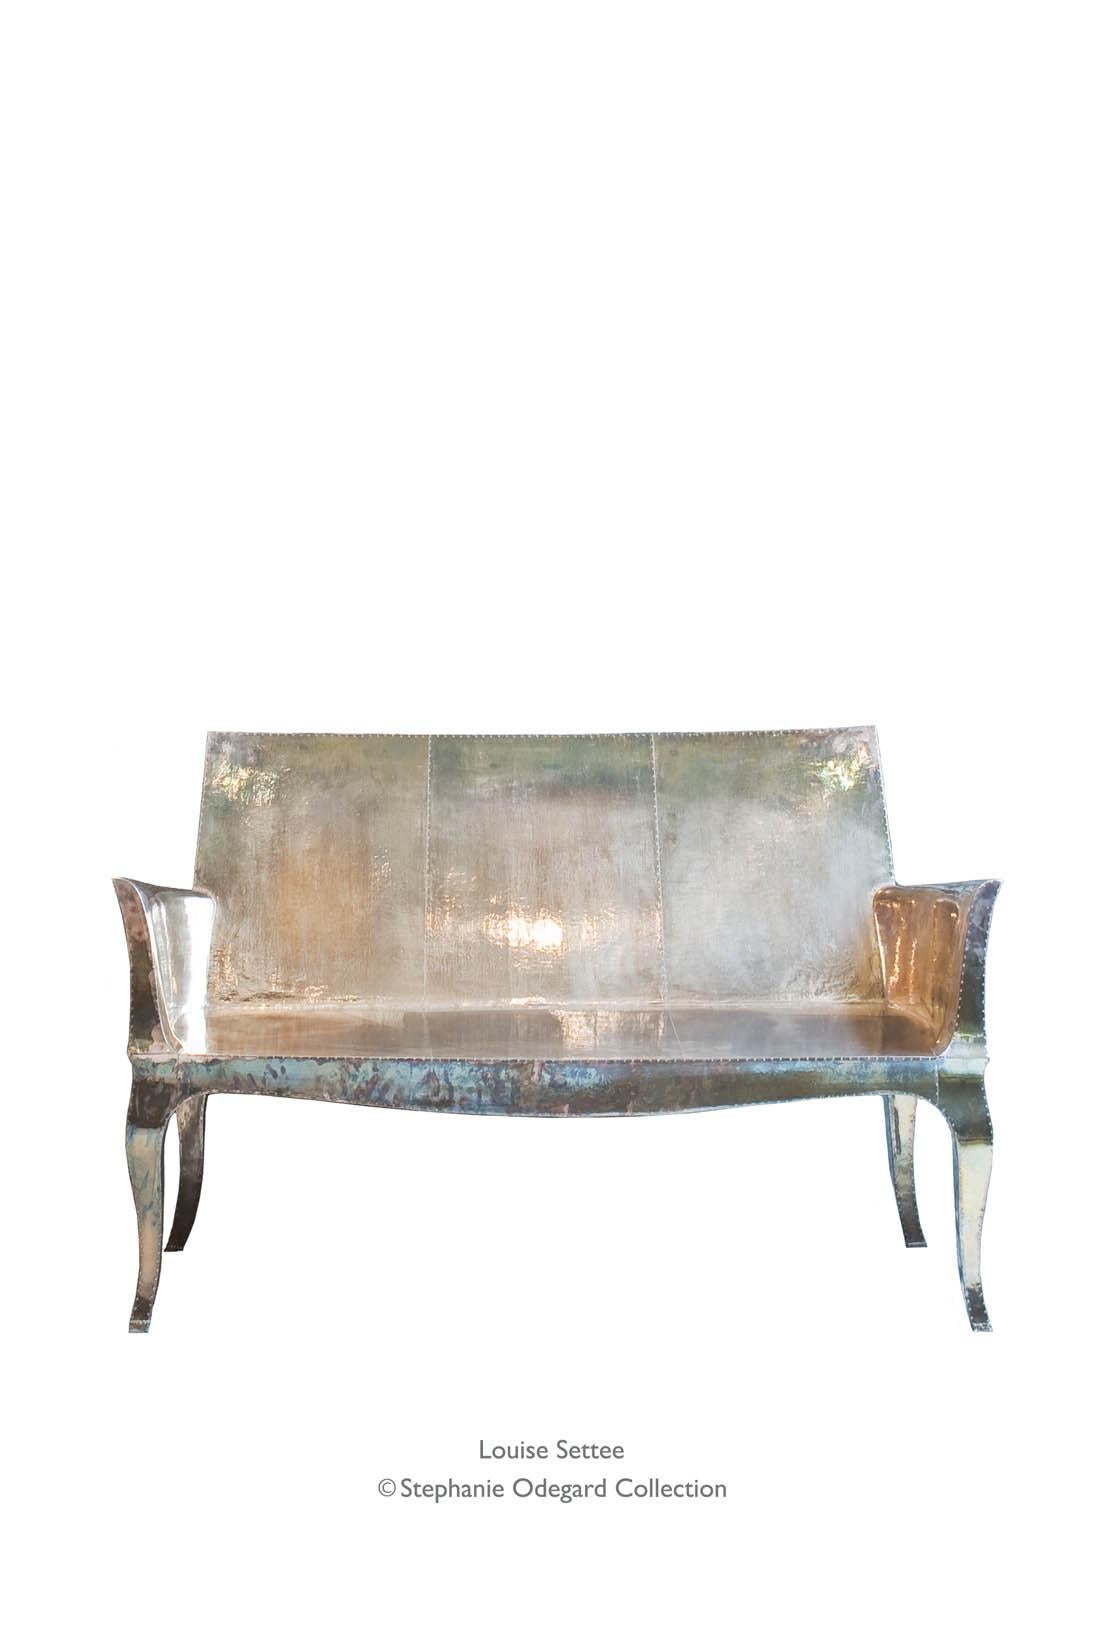 Louise Settee Art Deco Chaise Longues in Fine Hammered Antique Bronze  For Sale 6